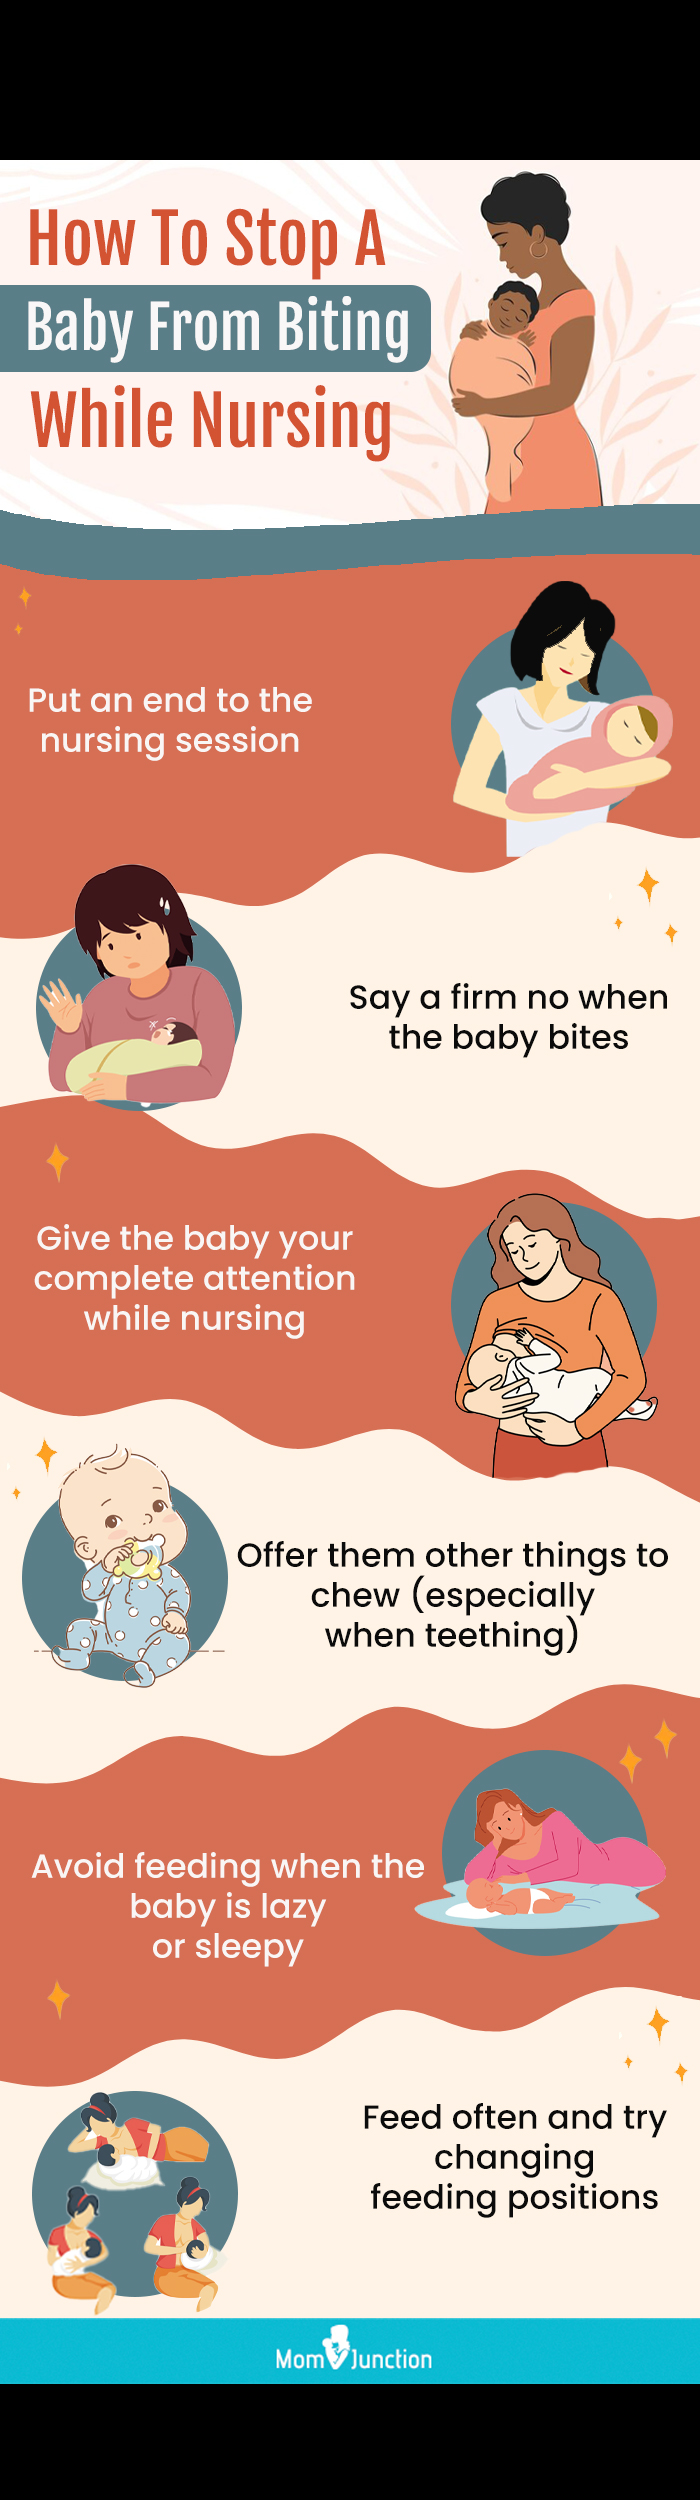 how to stop a baby from biting while nursing (infographic)